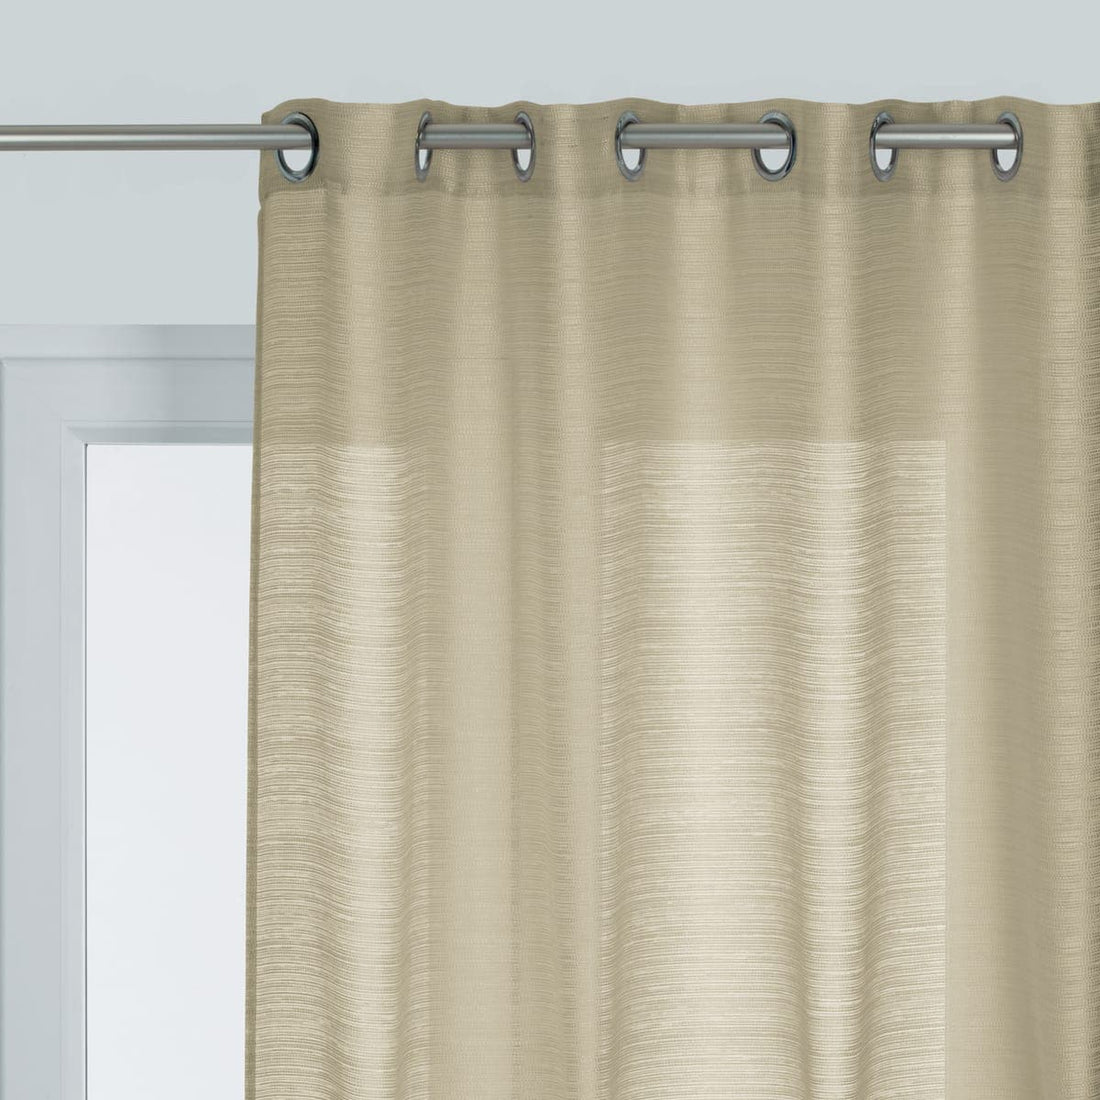 ECRU ROPE FILTER CURTAIN 140X280 CM WITH EYELETS - best price from Maltashopper.com BR480007454